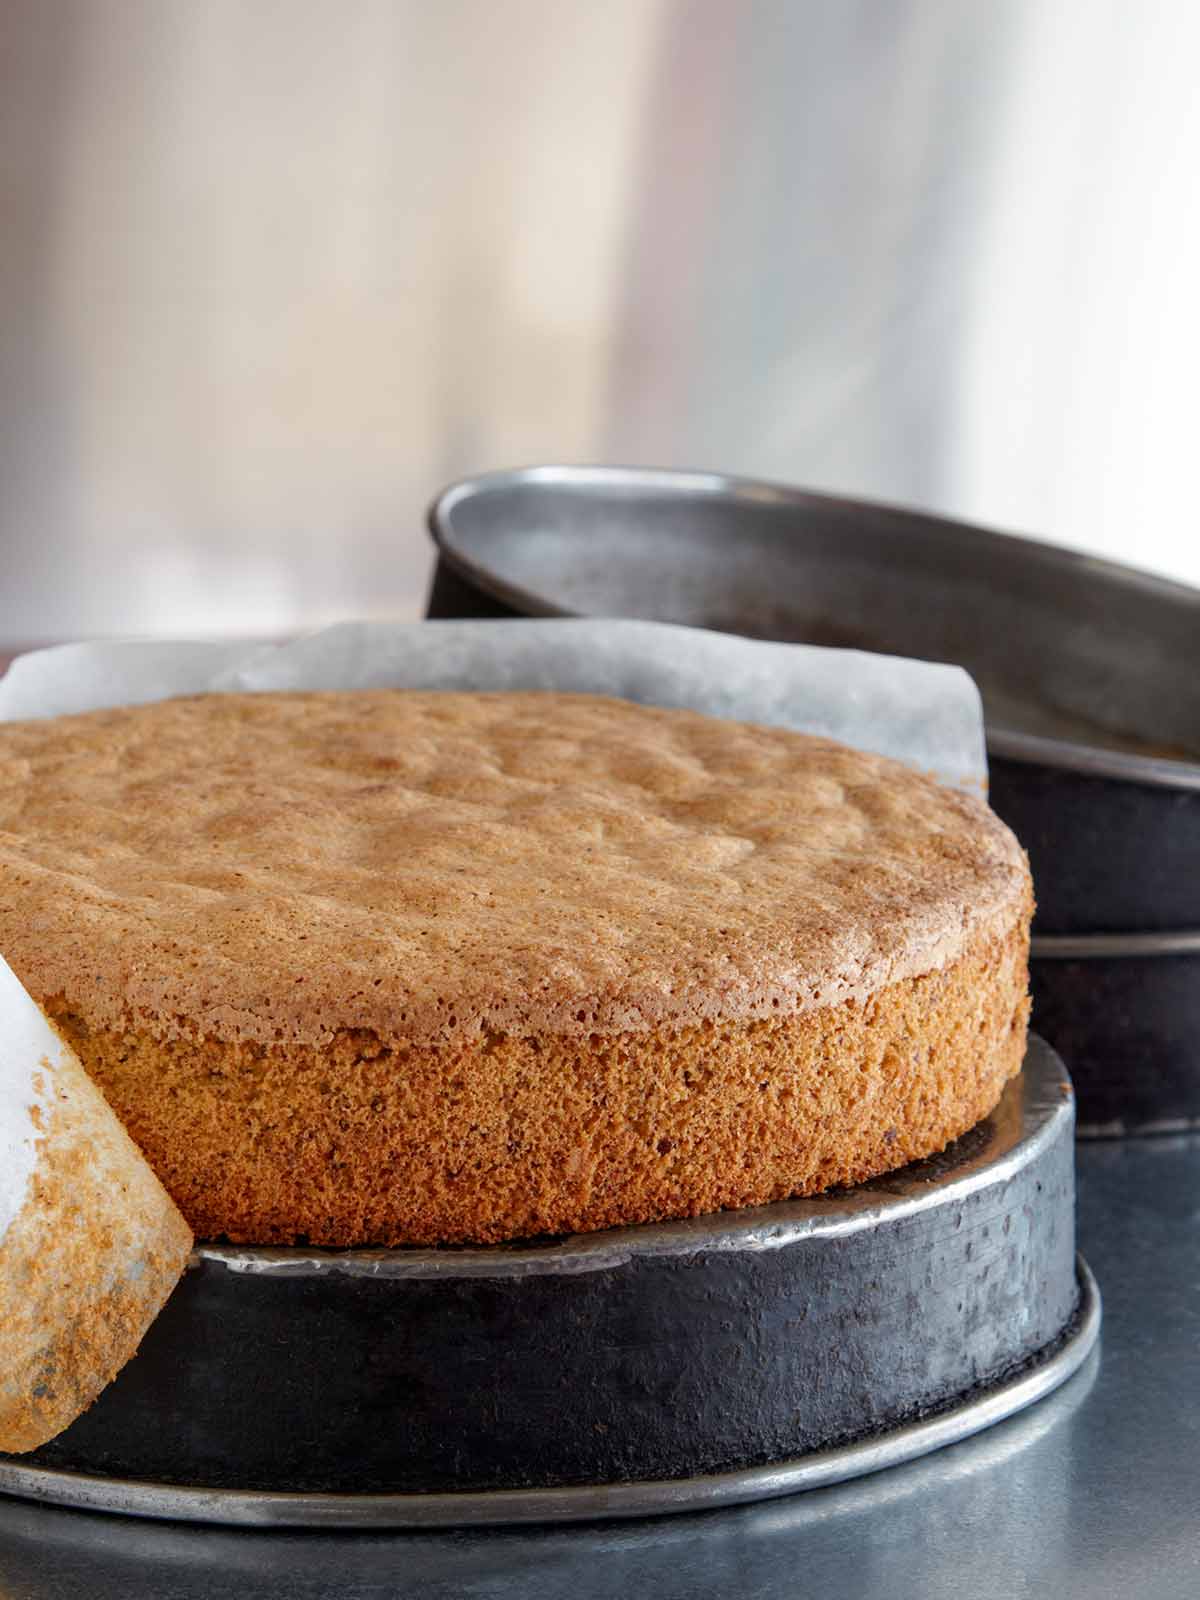 A spiced nut cake resting on an upside-down cake pan with a strip of parchment half removed from the edges of the cake.